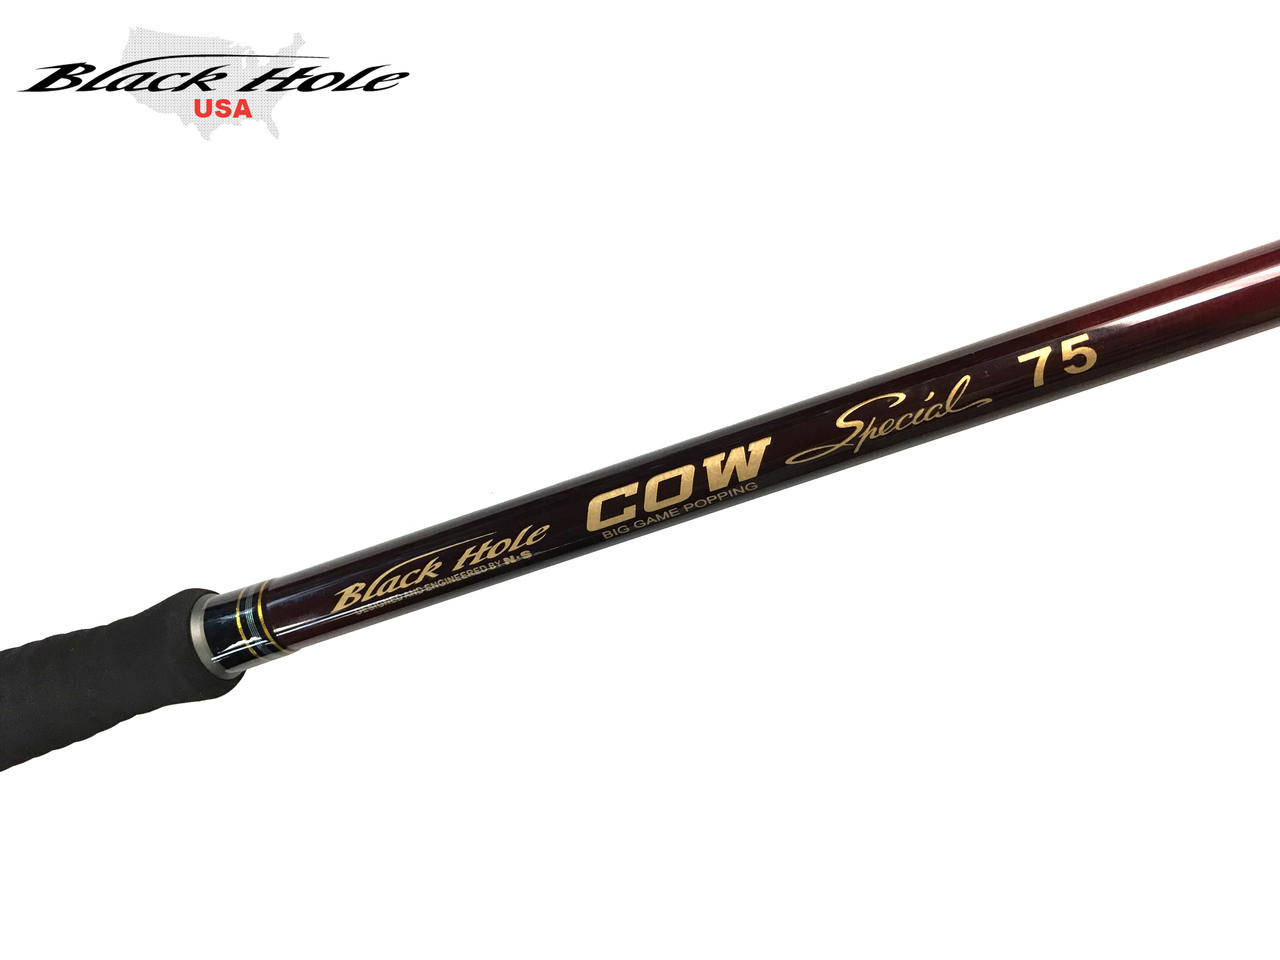 Black Hole 7'4 Cow Special II 75 Popping Spinning Rod